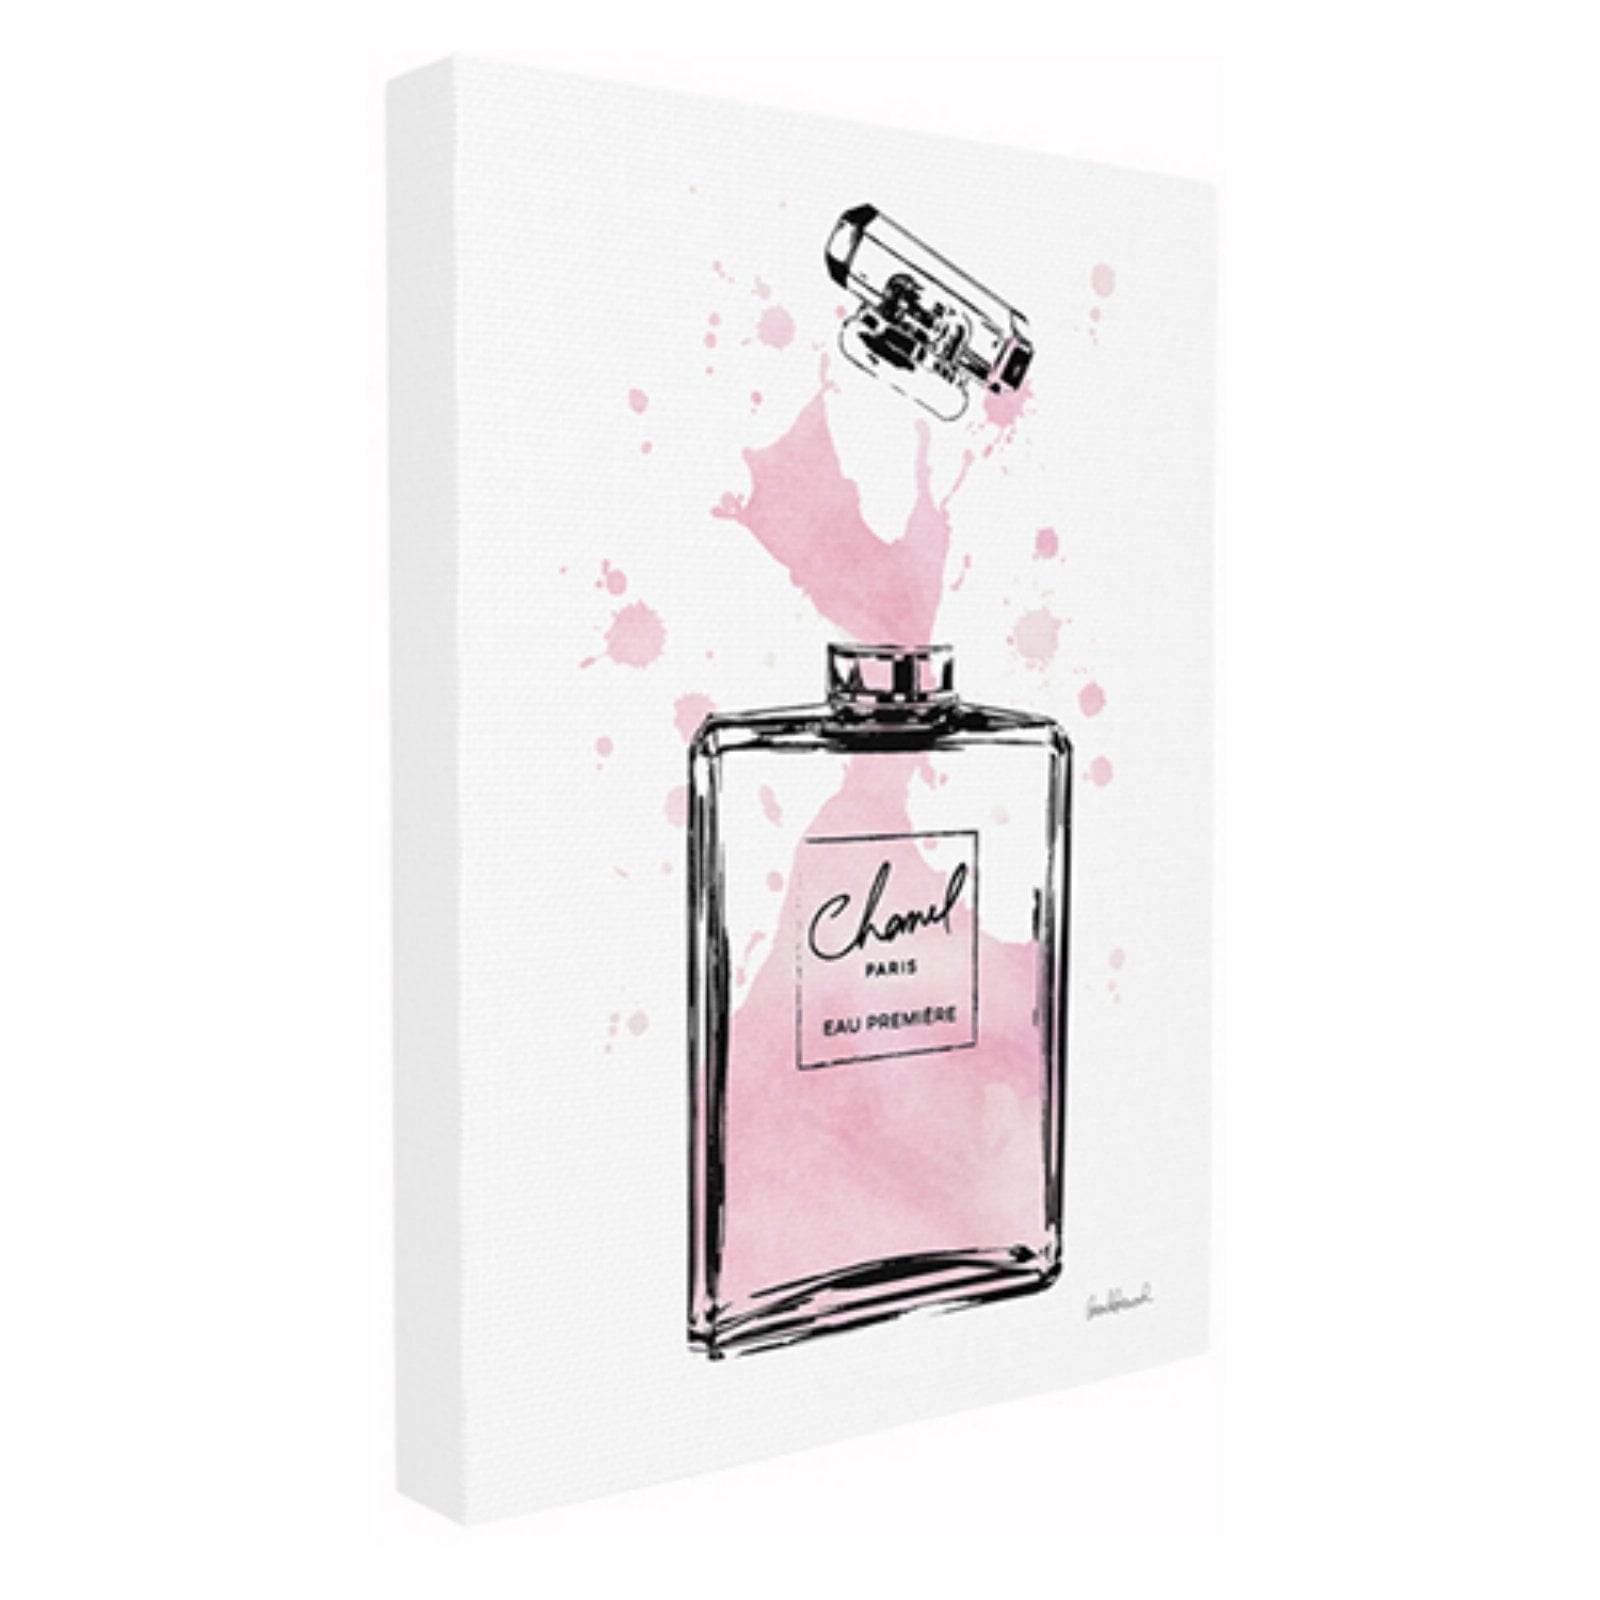 The Stupell Home Decor Collection Pretty Pink Watercolor Perfume Bottle  Splash Oversized Wall Plaque Art, 12.5 x 0.5 x 18.5 